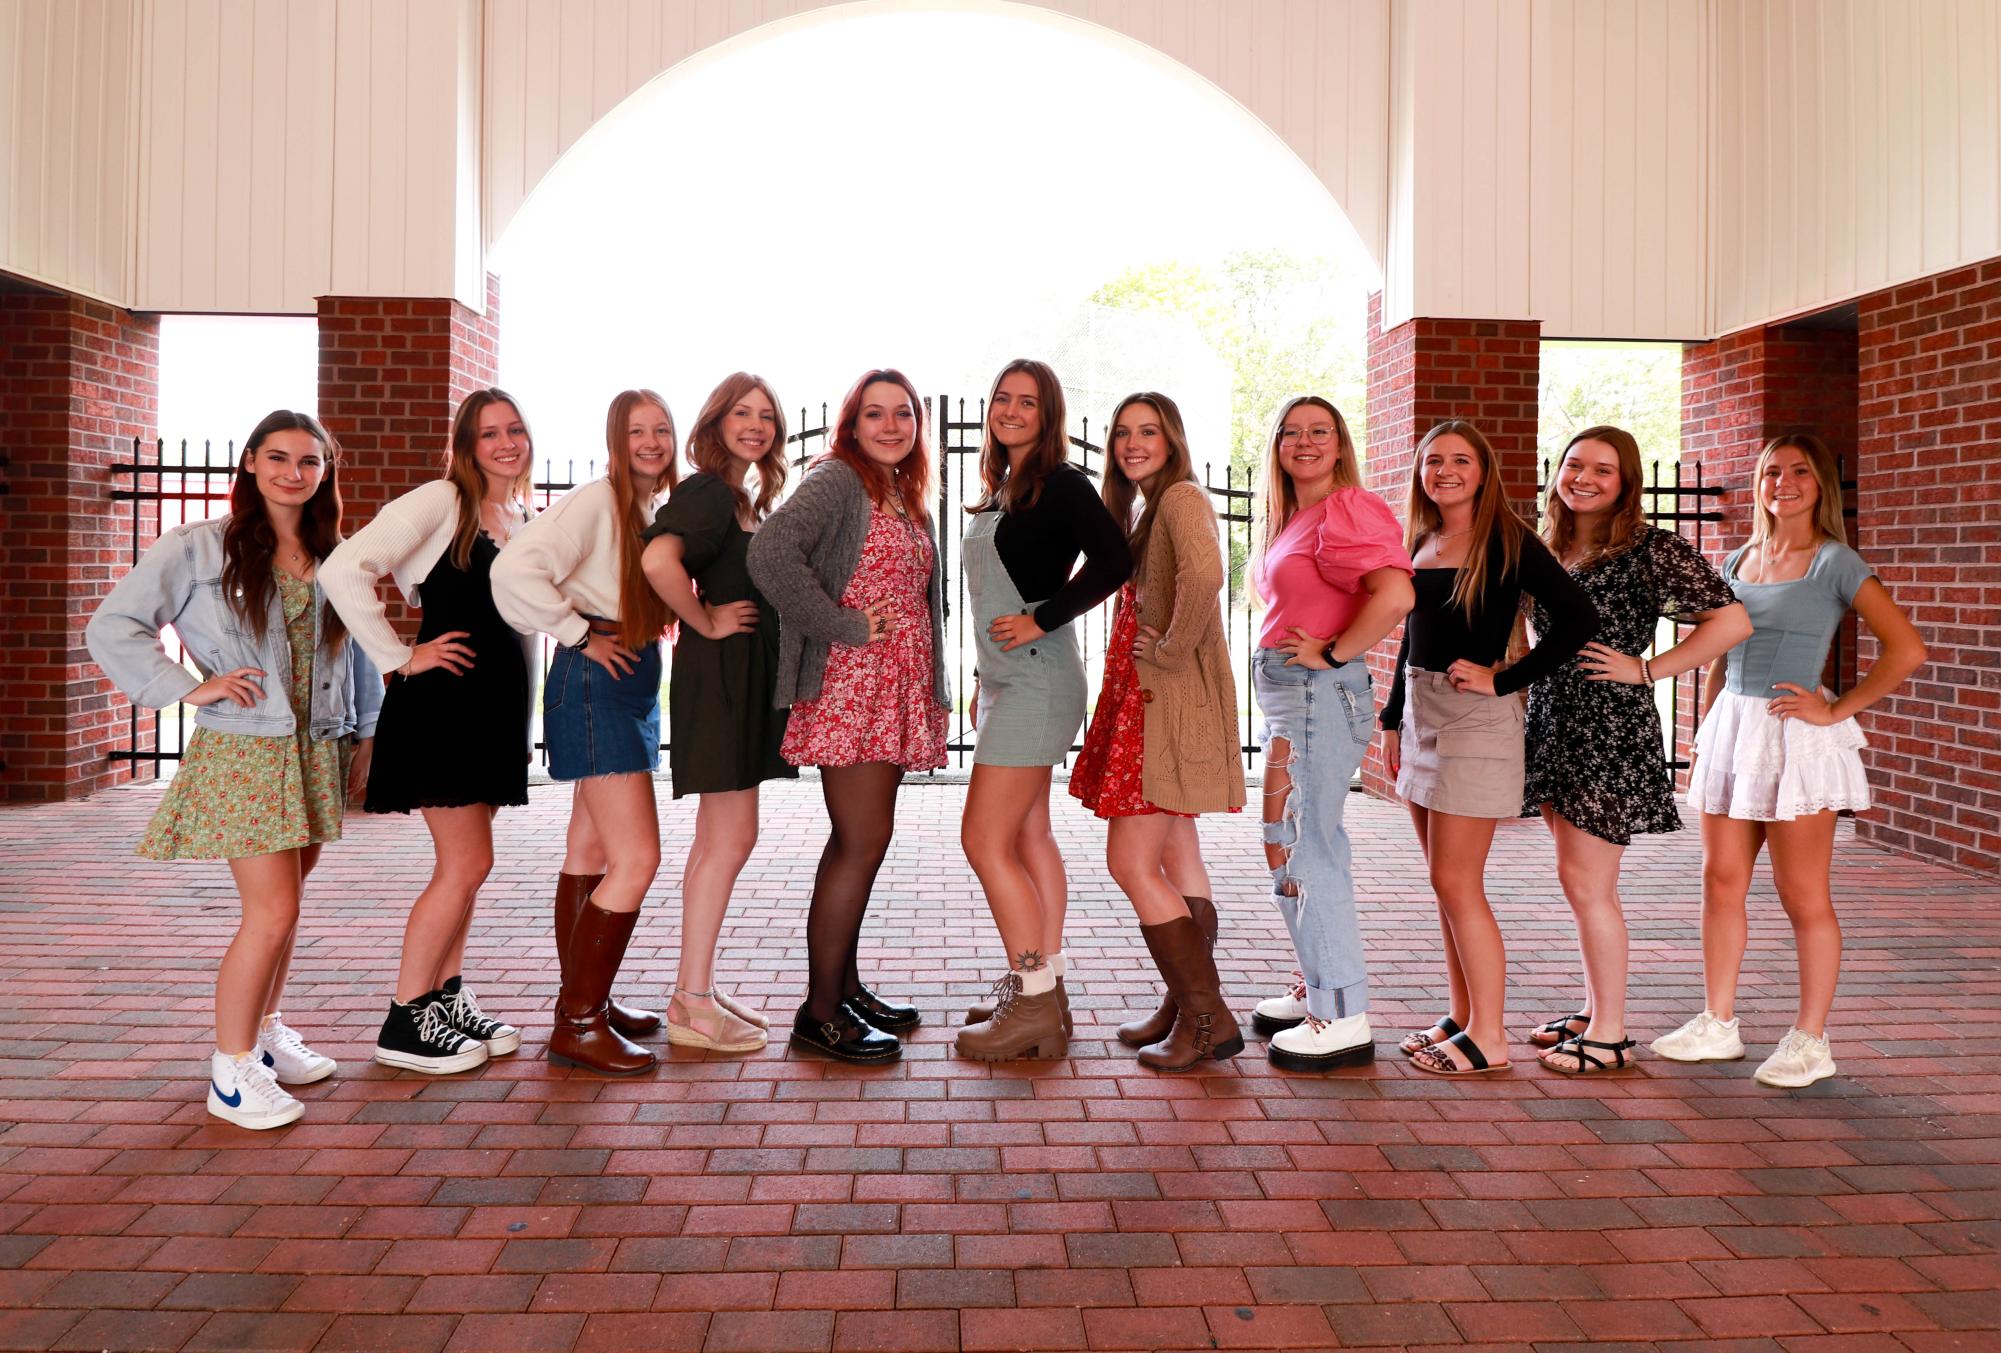 From left to right, the homecoming court consists of Katelyn Ball, Victoria Farmer, Keira Woods, Lindsay Green, Katelyn Ketterman, Allyson Glatz, Caroline Dumm, Rachel Stiffler, and Lilly Wojcik.  Voting for Homecoming Queen will take place at the Pep Rally and will be announced at the football game later that evening.  Photograph Courtesy of Wade Bowers 